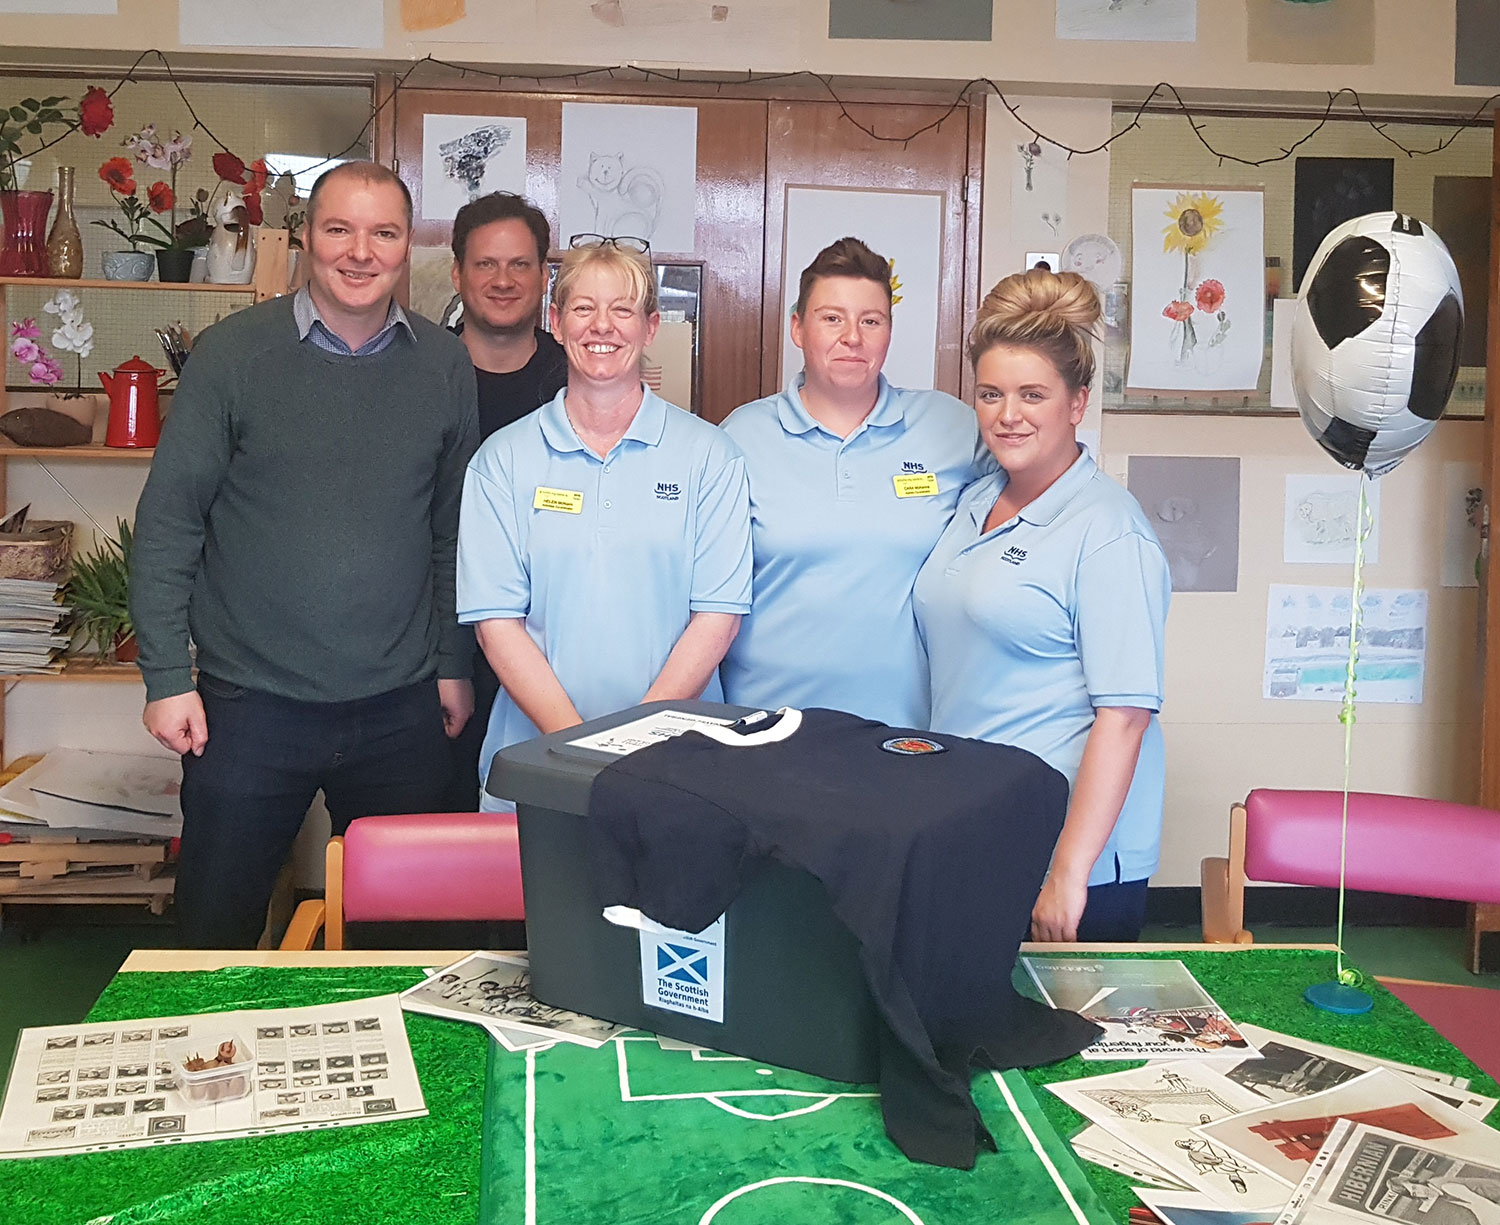 Care Provider Organisation – Staff pictured at NHS Gartnavel Royal ahead of a Football Memories session